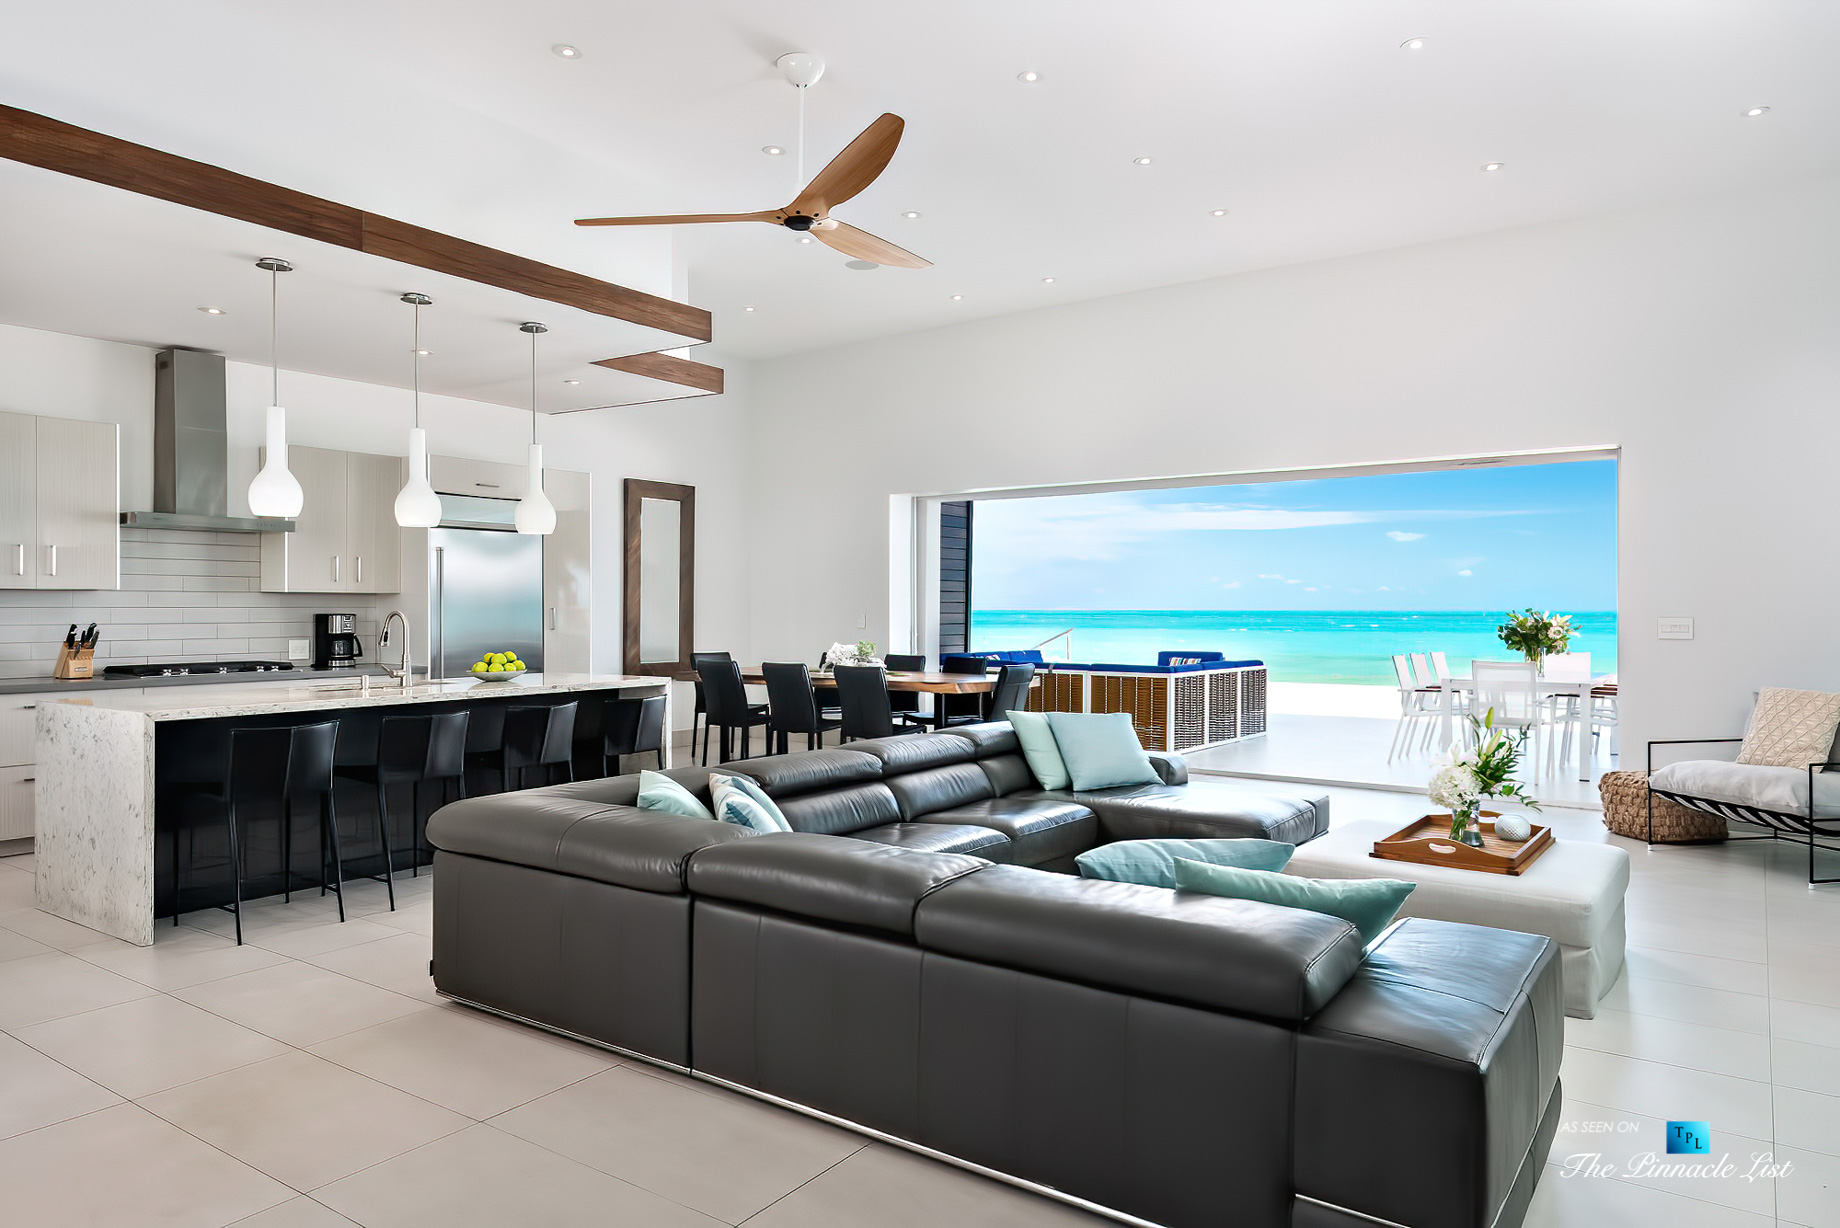 Tip of the Tail Luxury Villa – Providenciales, Turks and Caicos Islands – Living Room